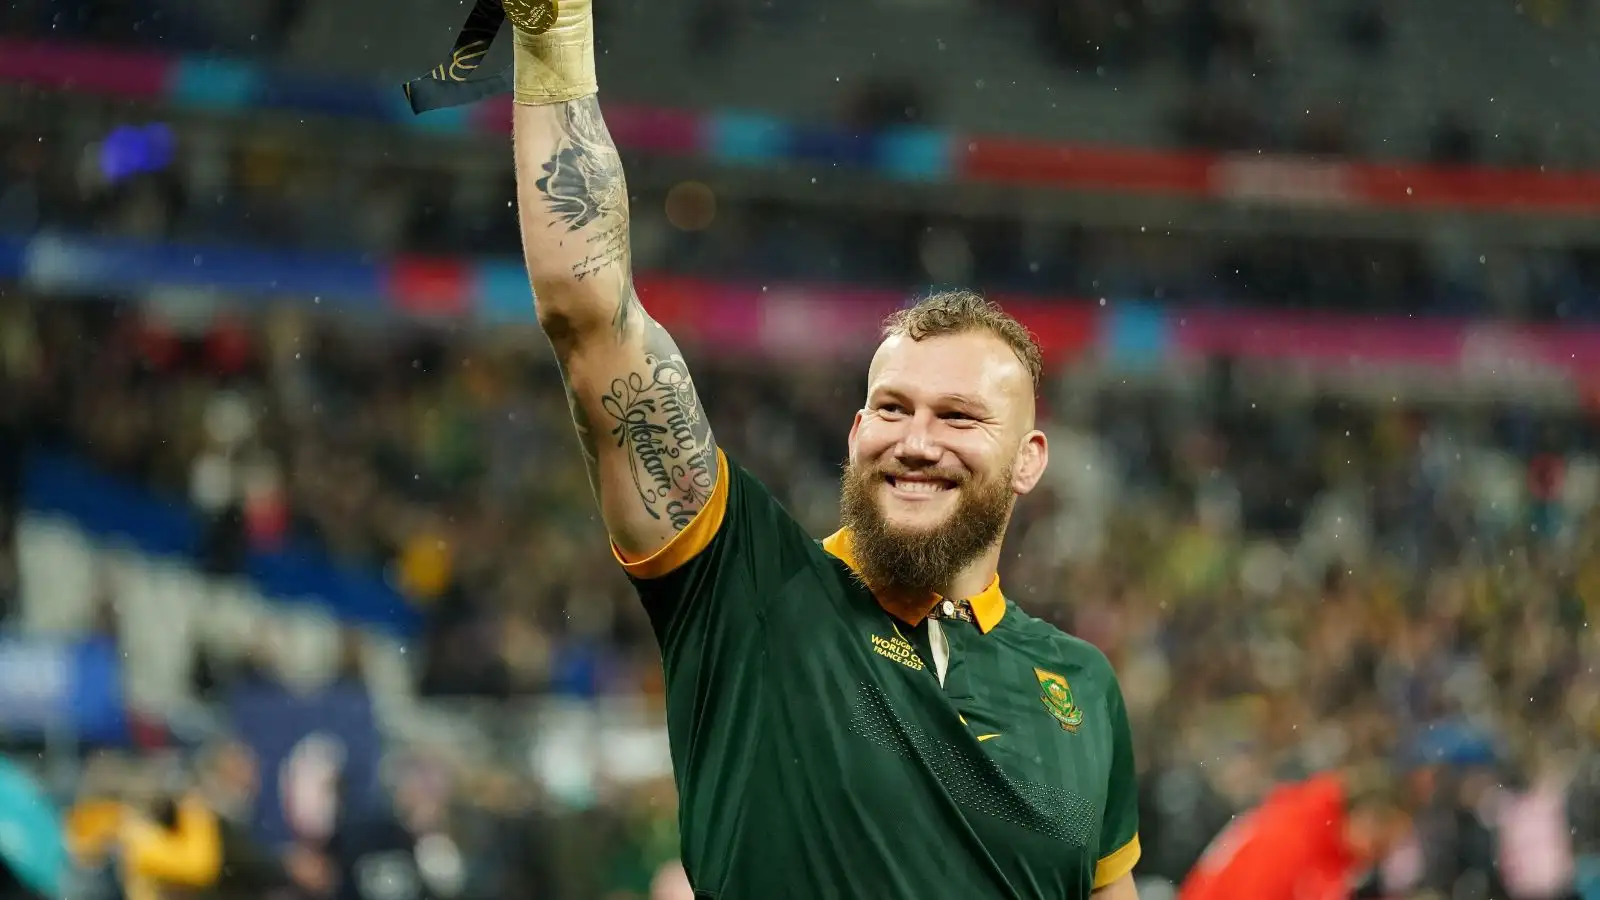 South Africa's RG Snyman celebrates after winning the Rugby World Cup 2023 final match at the Stade de France in Paris, France